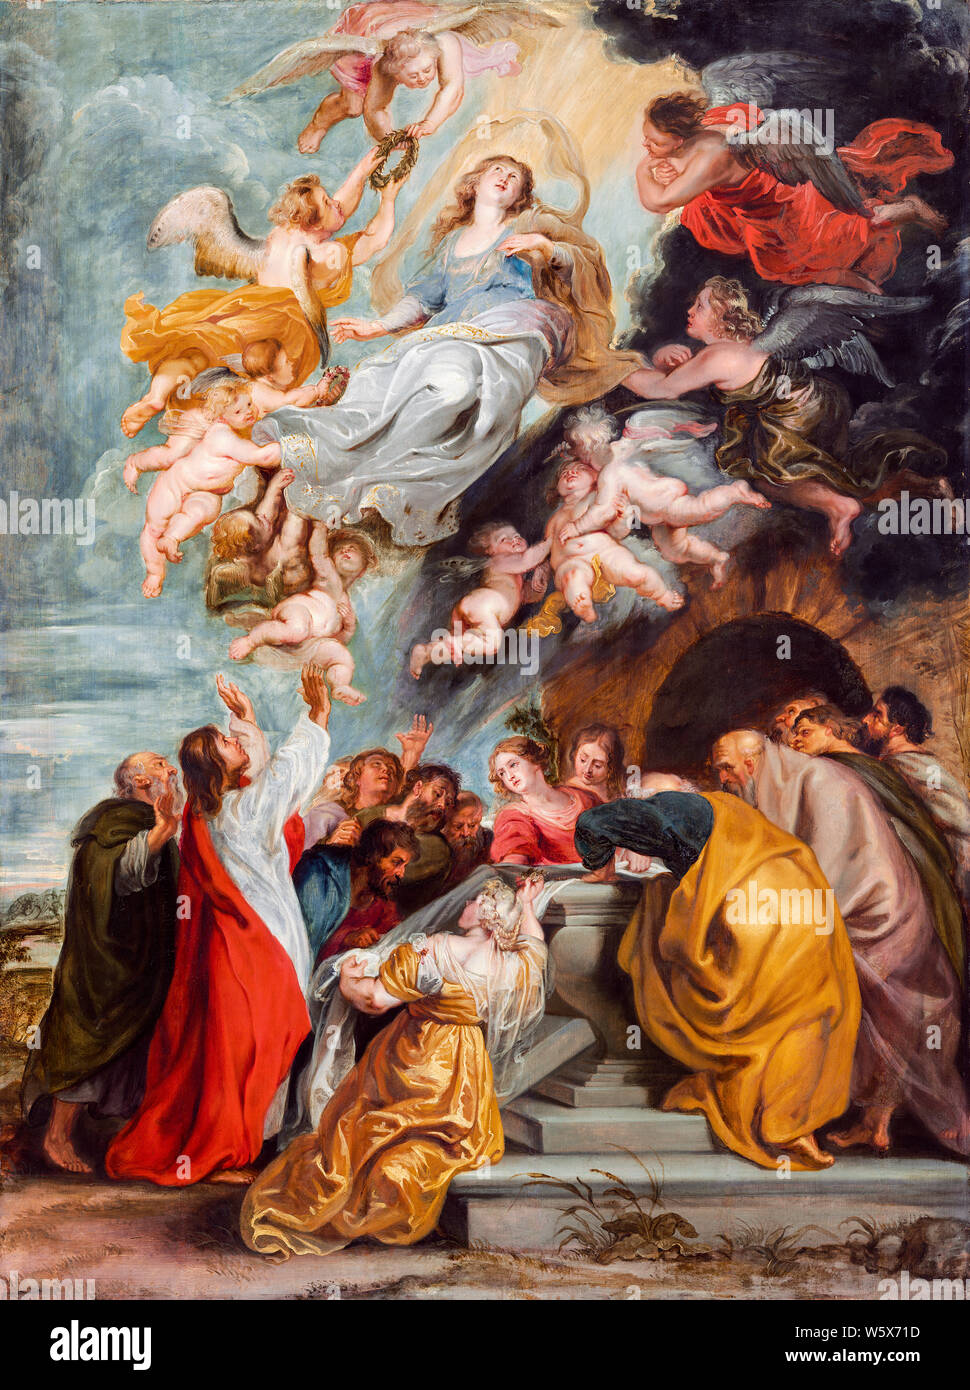 Peter Paul Rubens, Assumption of the Virgin Mary, painting, 1620-1630 Stock Photo